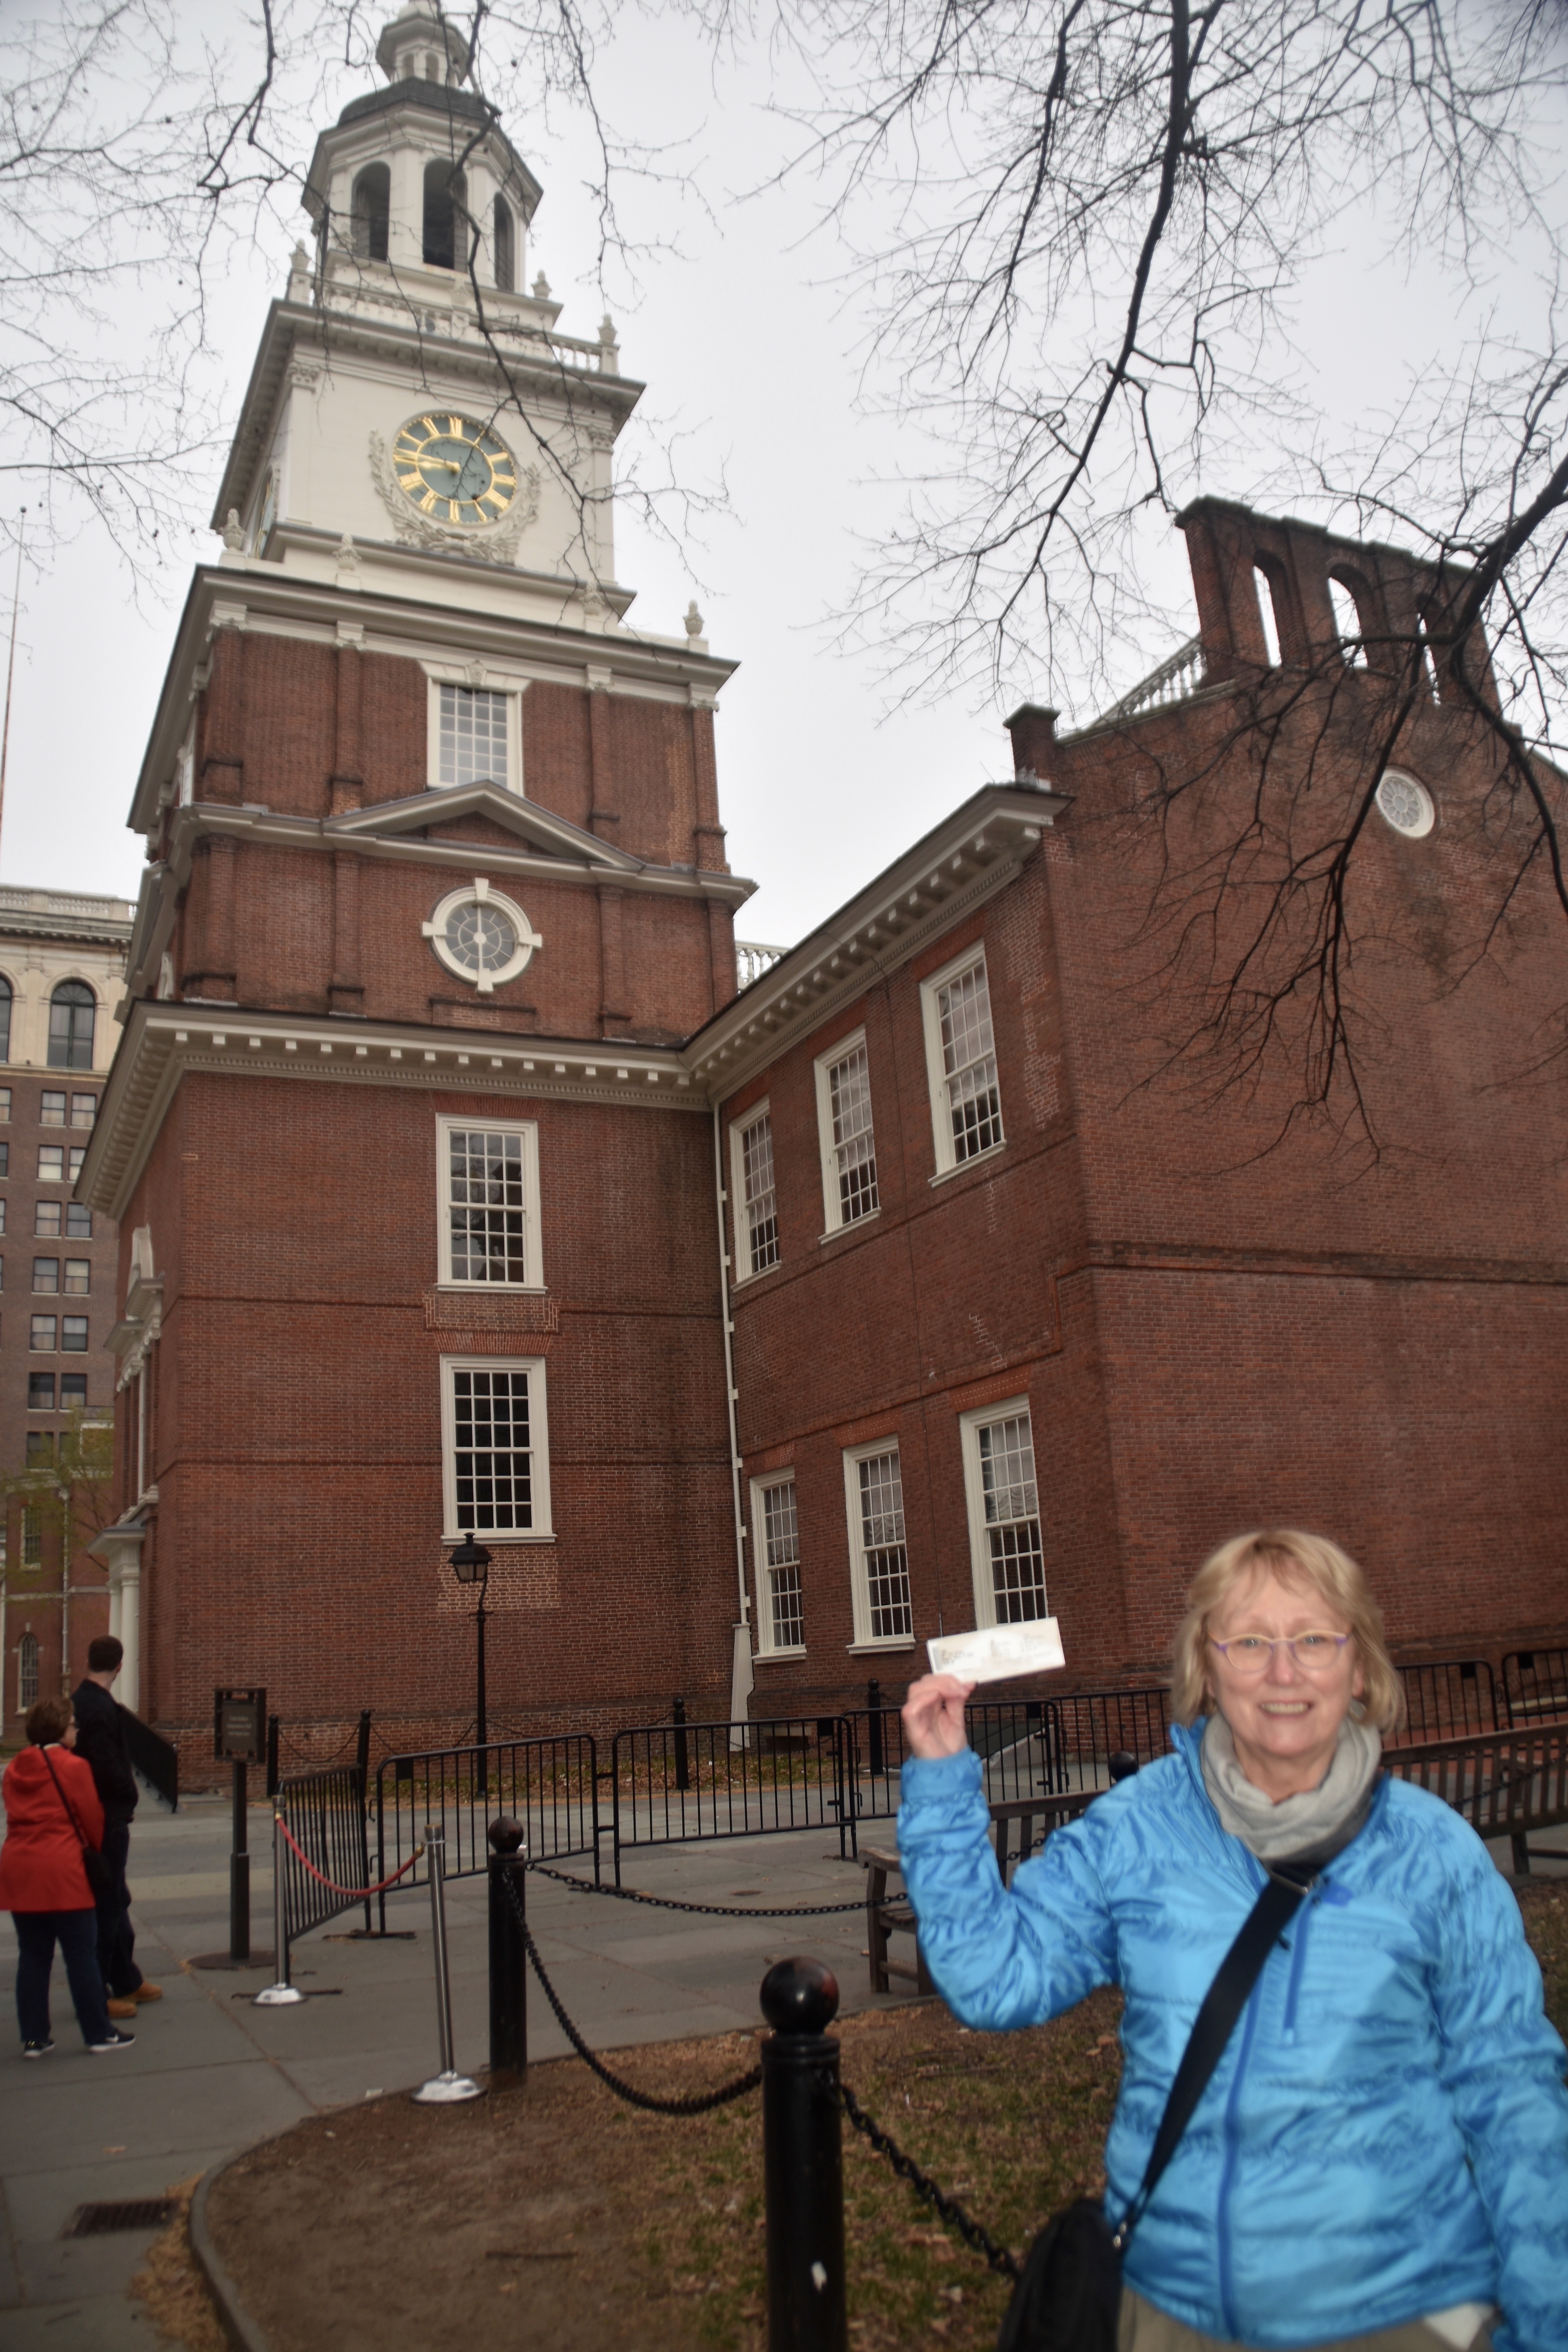 Tickets for Independence Hall